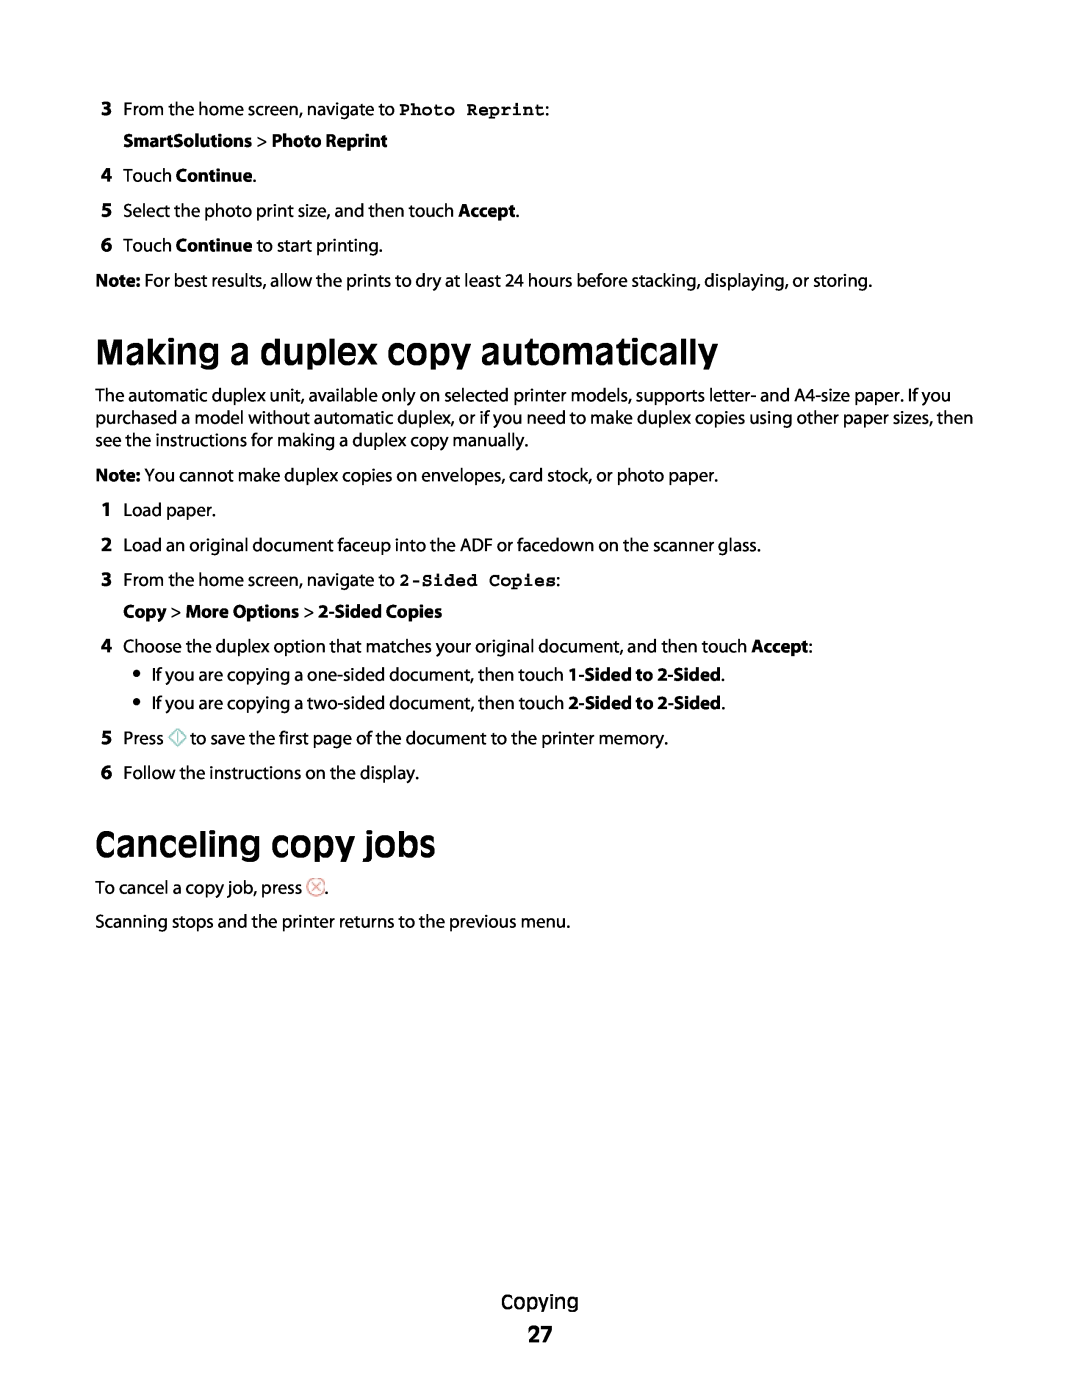 Lexmark S600 manual Making a duplex copy automatically, Canceling copy jobs, Touch Continue 